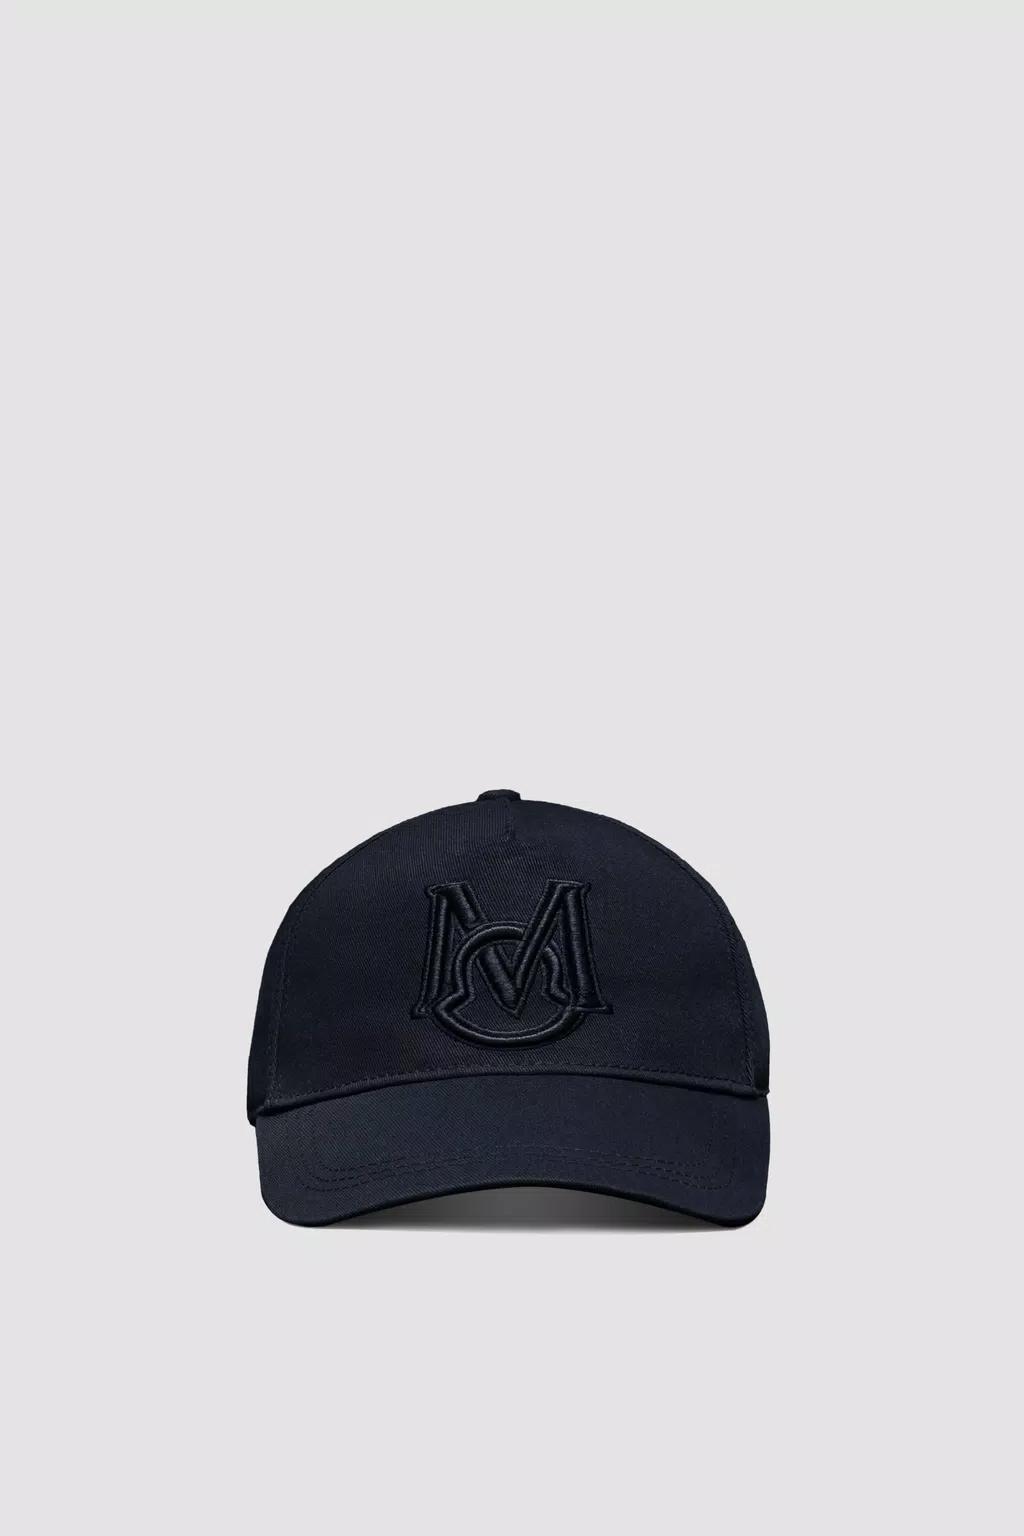 Hats & Beanies for Men - Accessories